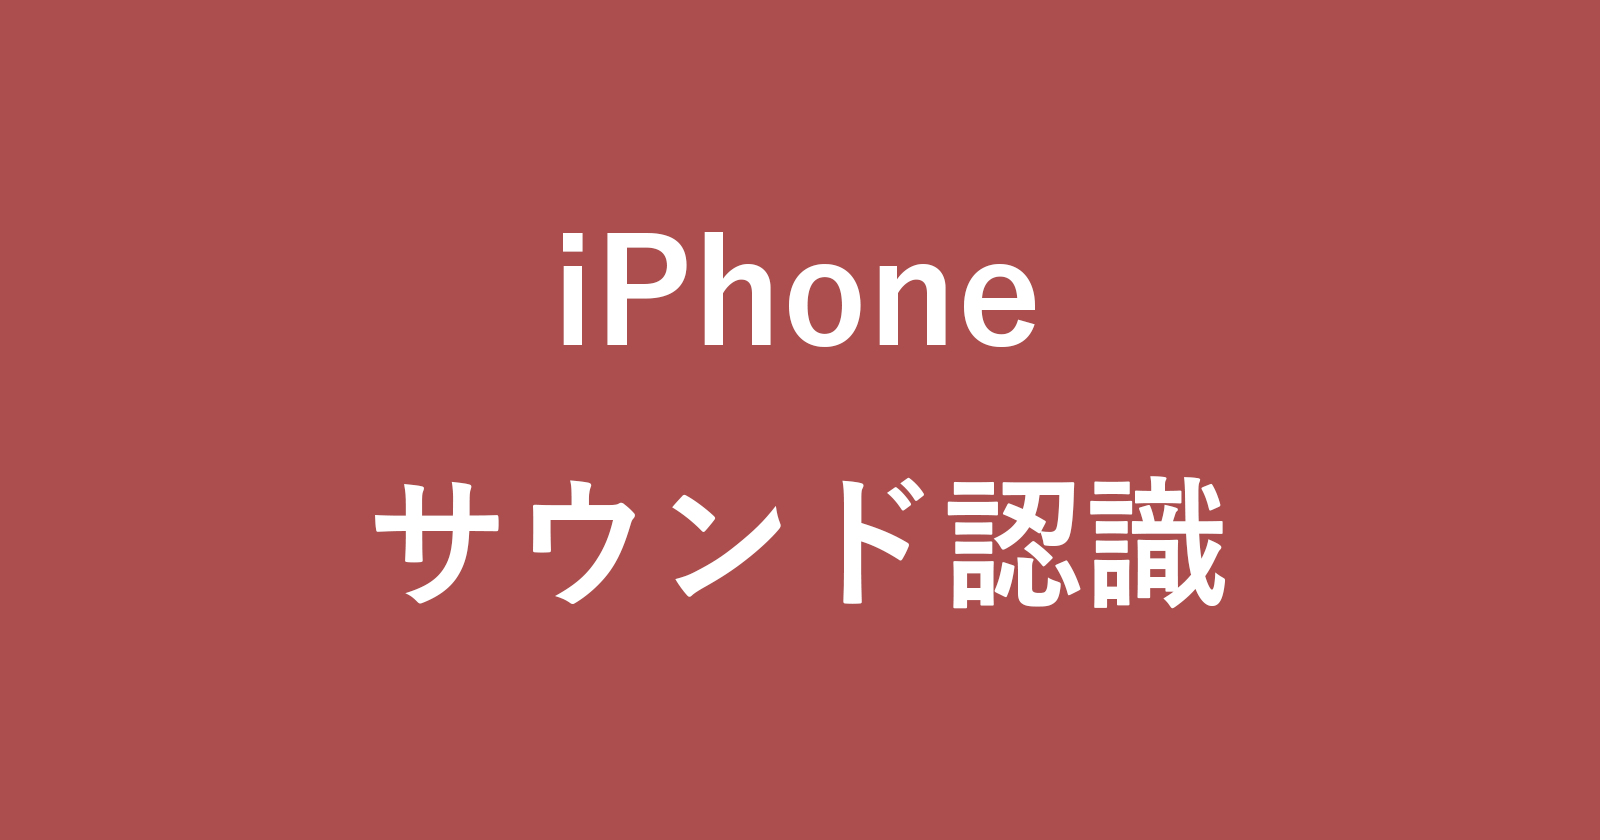 iphone sound recognition